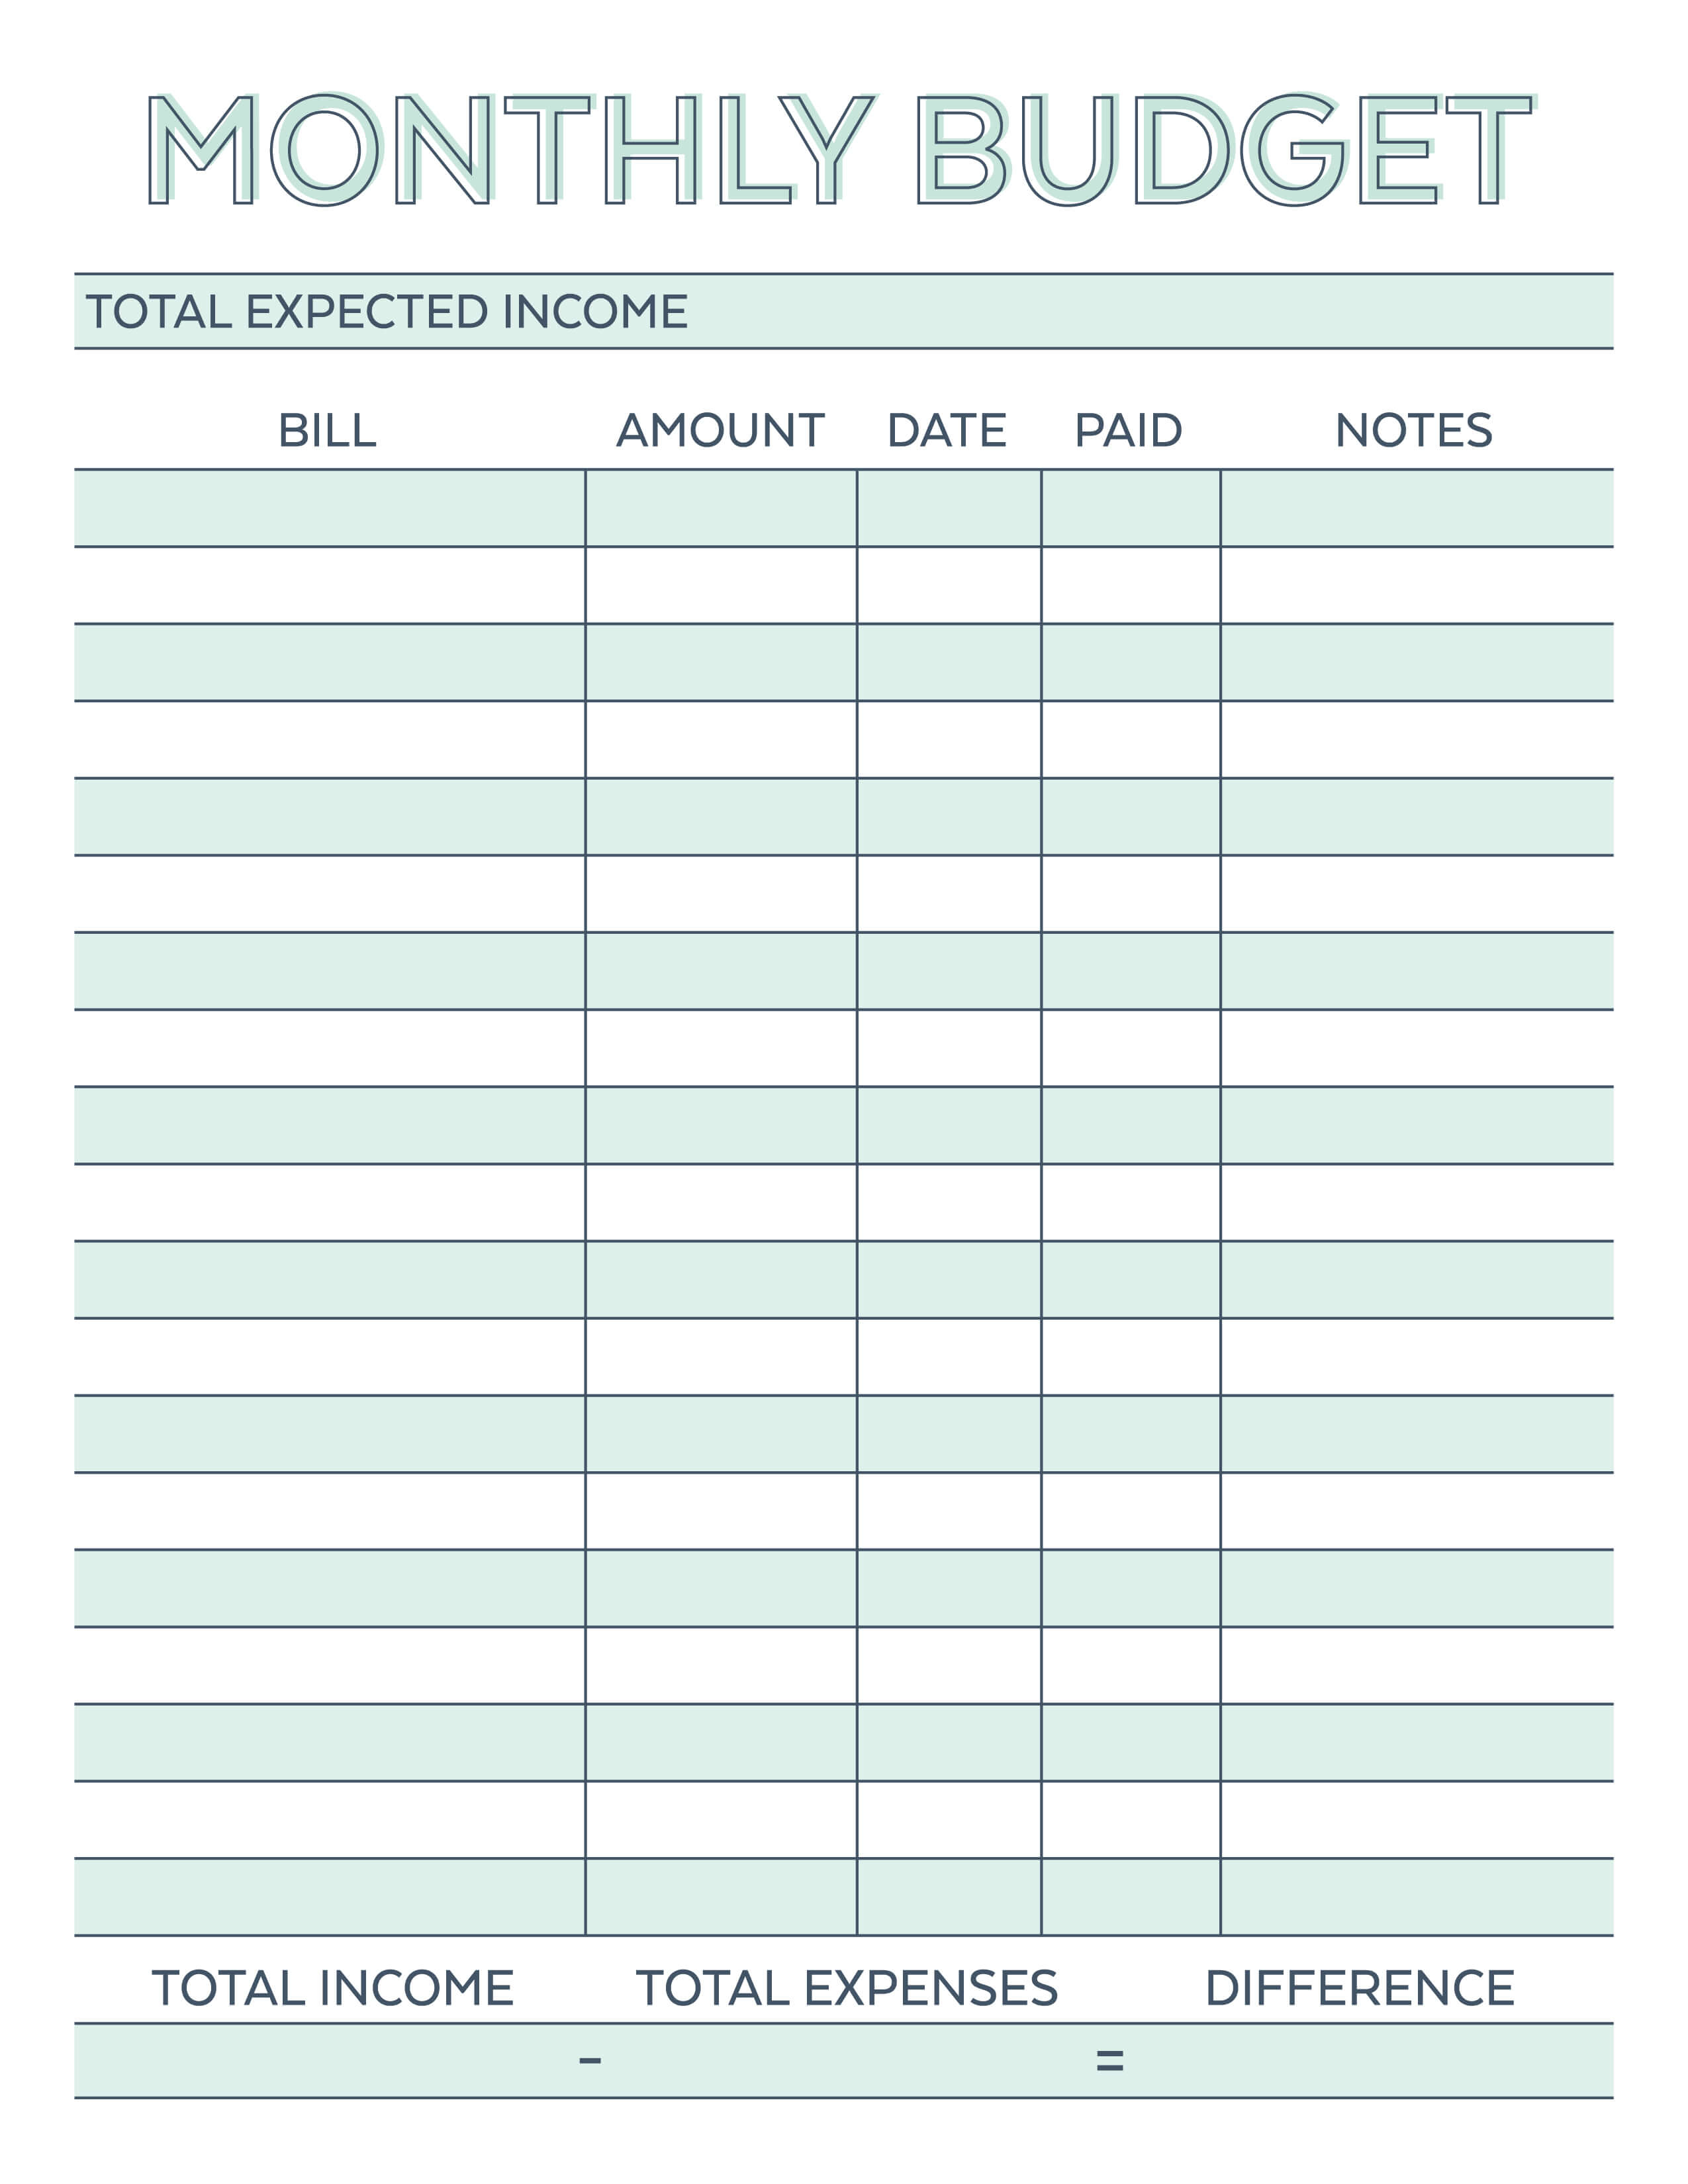 Monthly Budget Planner - Free Printable Budget Worksheet | Monthly Spending Worksheet Printable